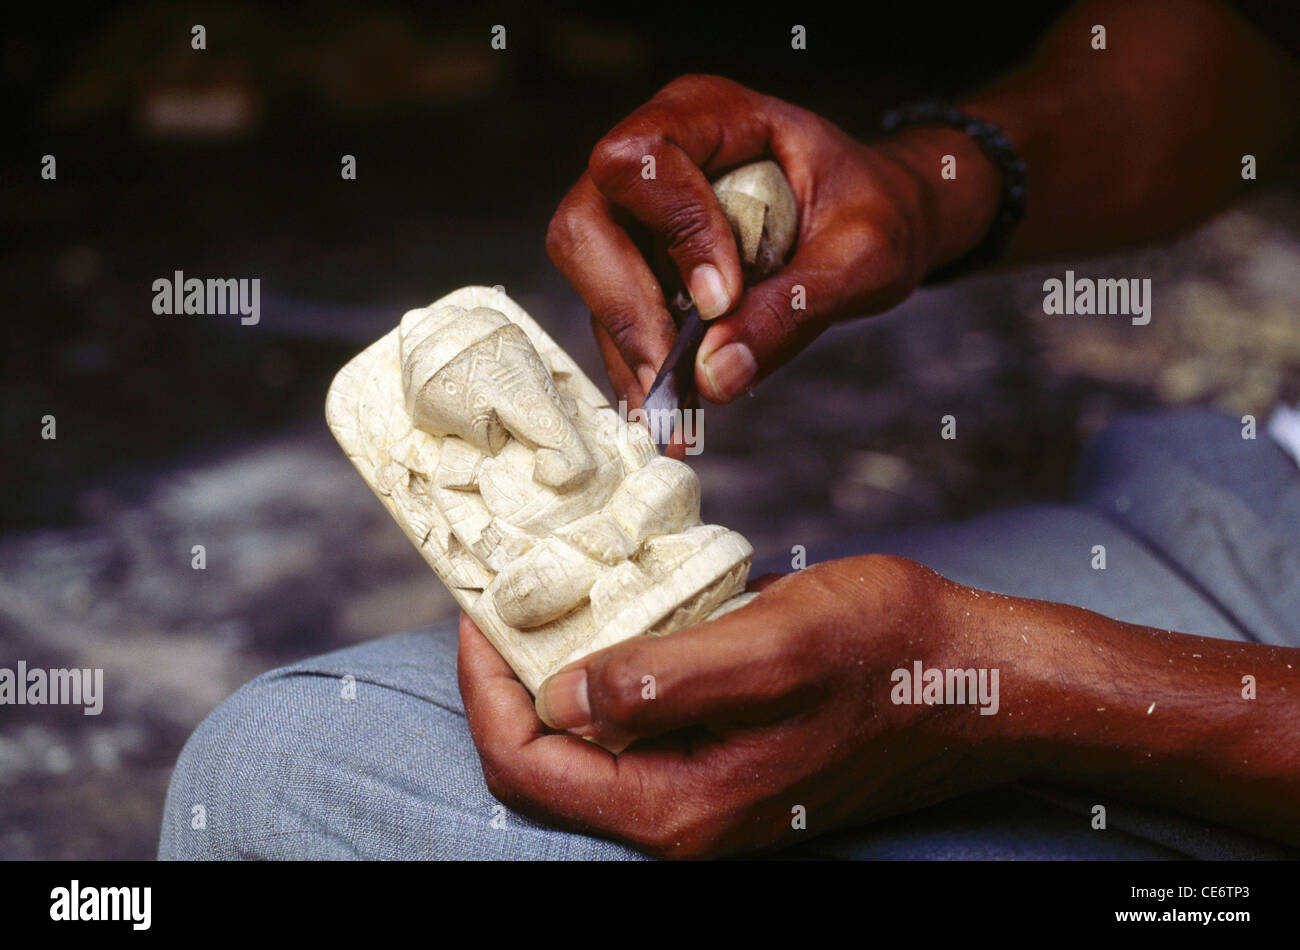 MAA 85114 : man carving lord ganesh idol from the root of white madar plant india Stock Photo